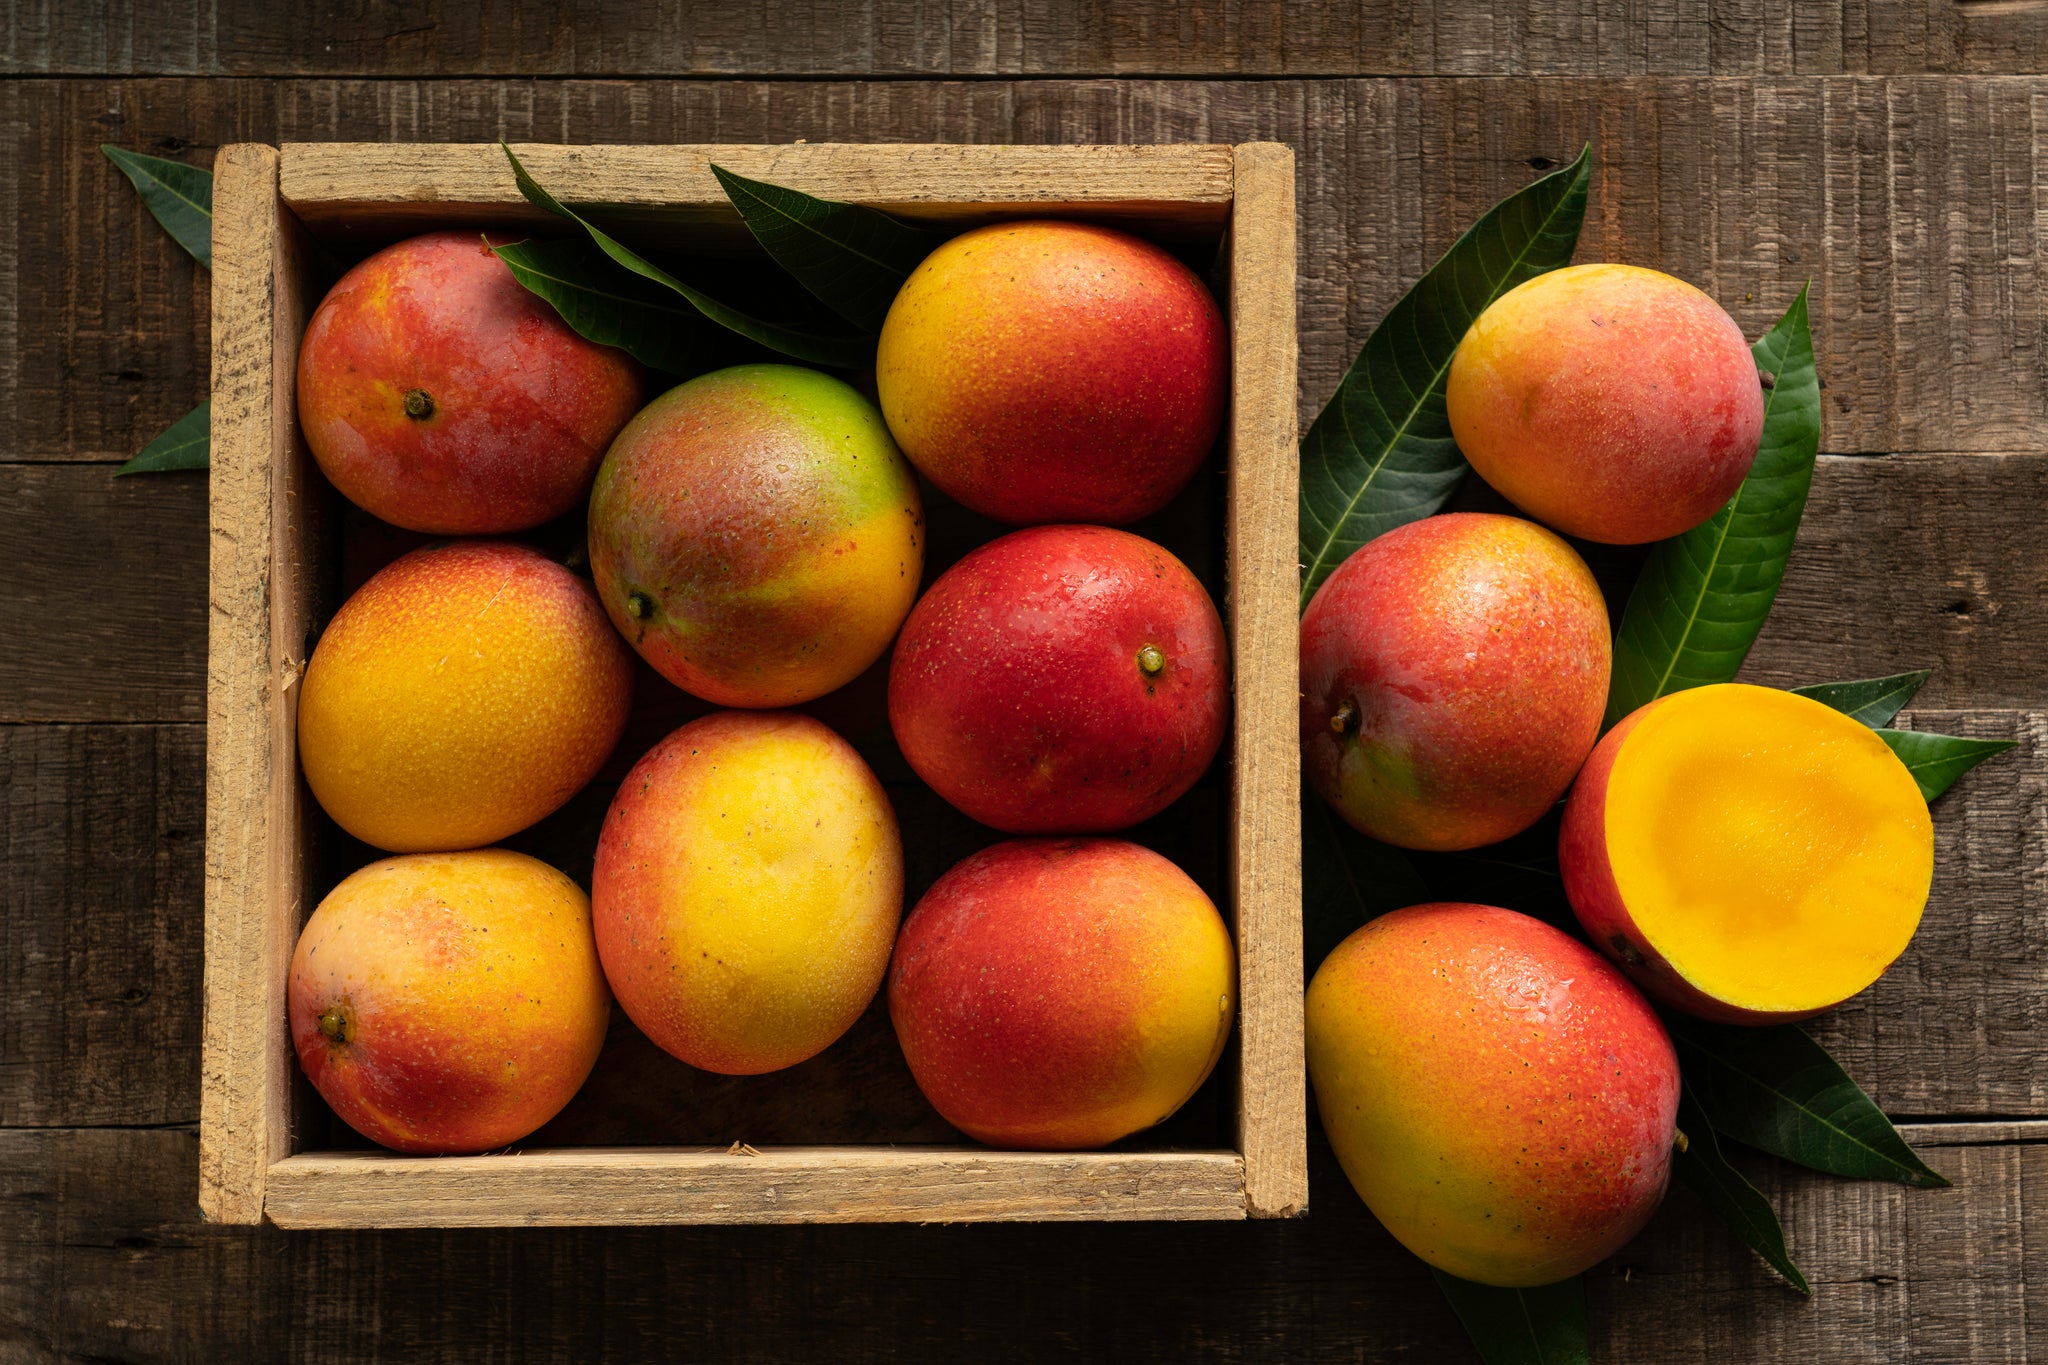 What to do with an abundance of mangoes